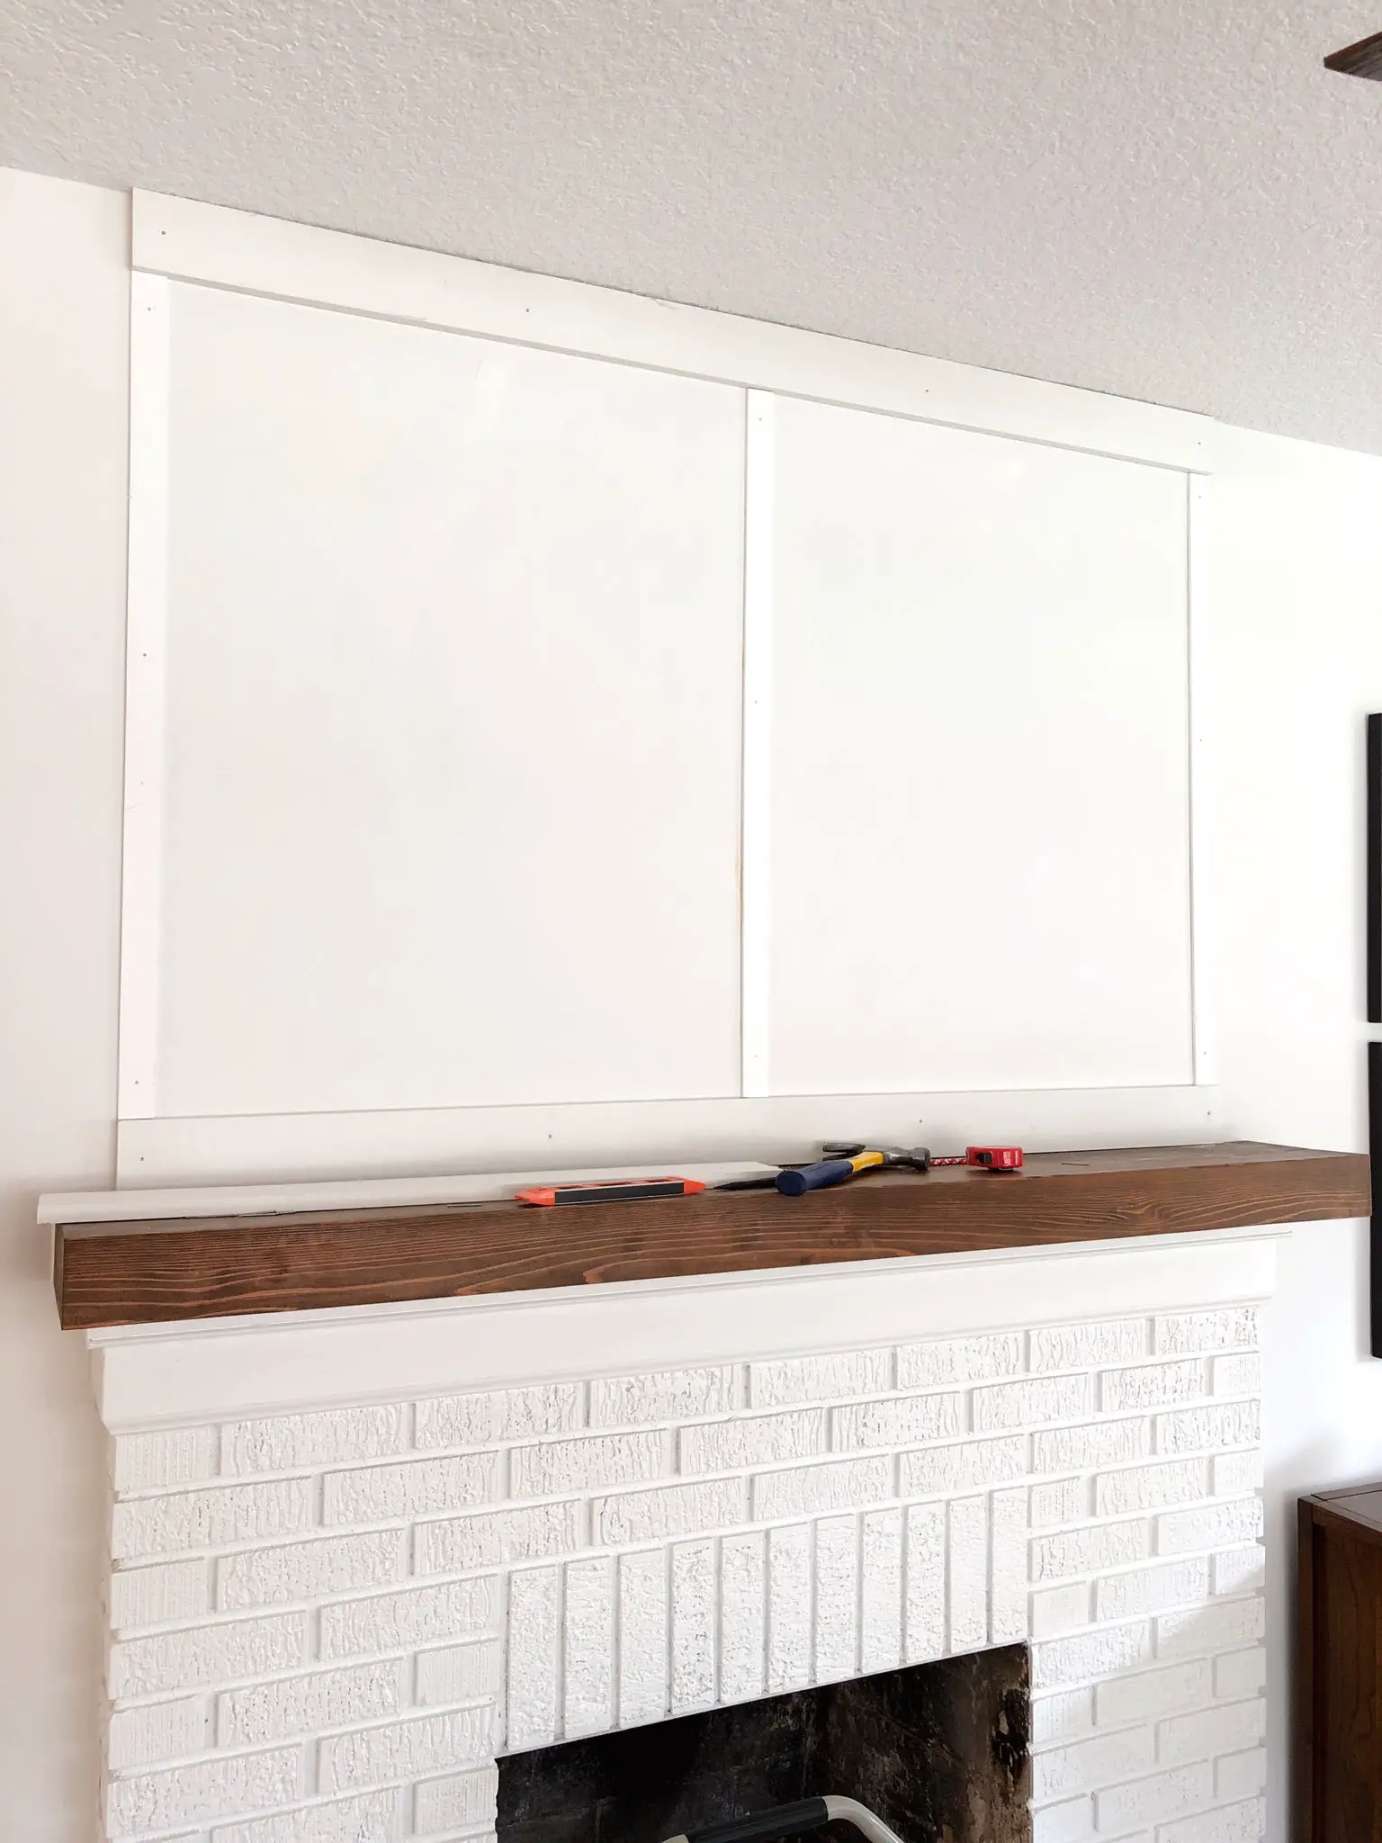 DIY Board and Batten Tutorial: Creating a Focal Point Above the